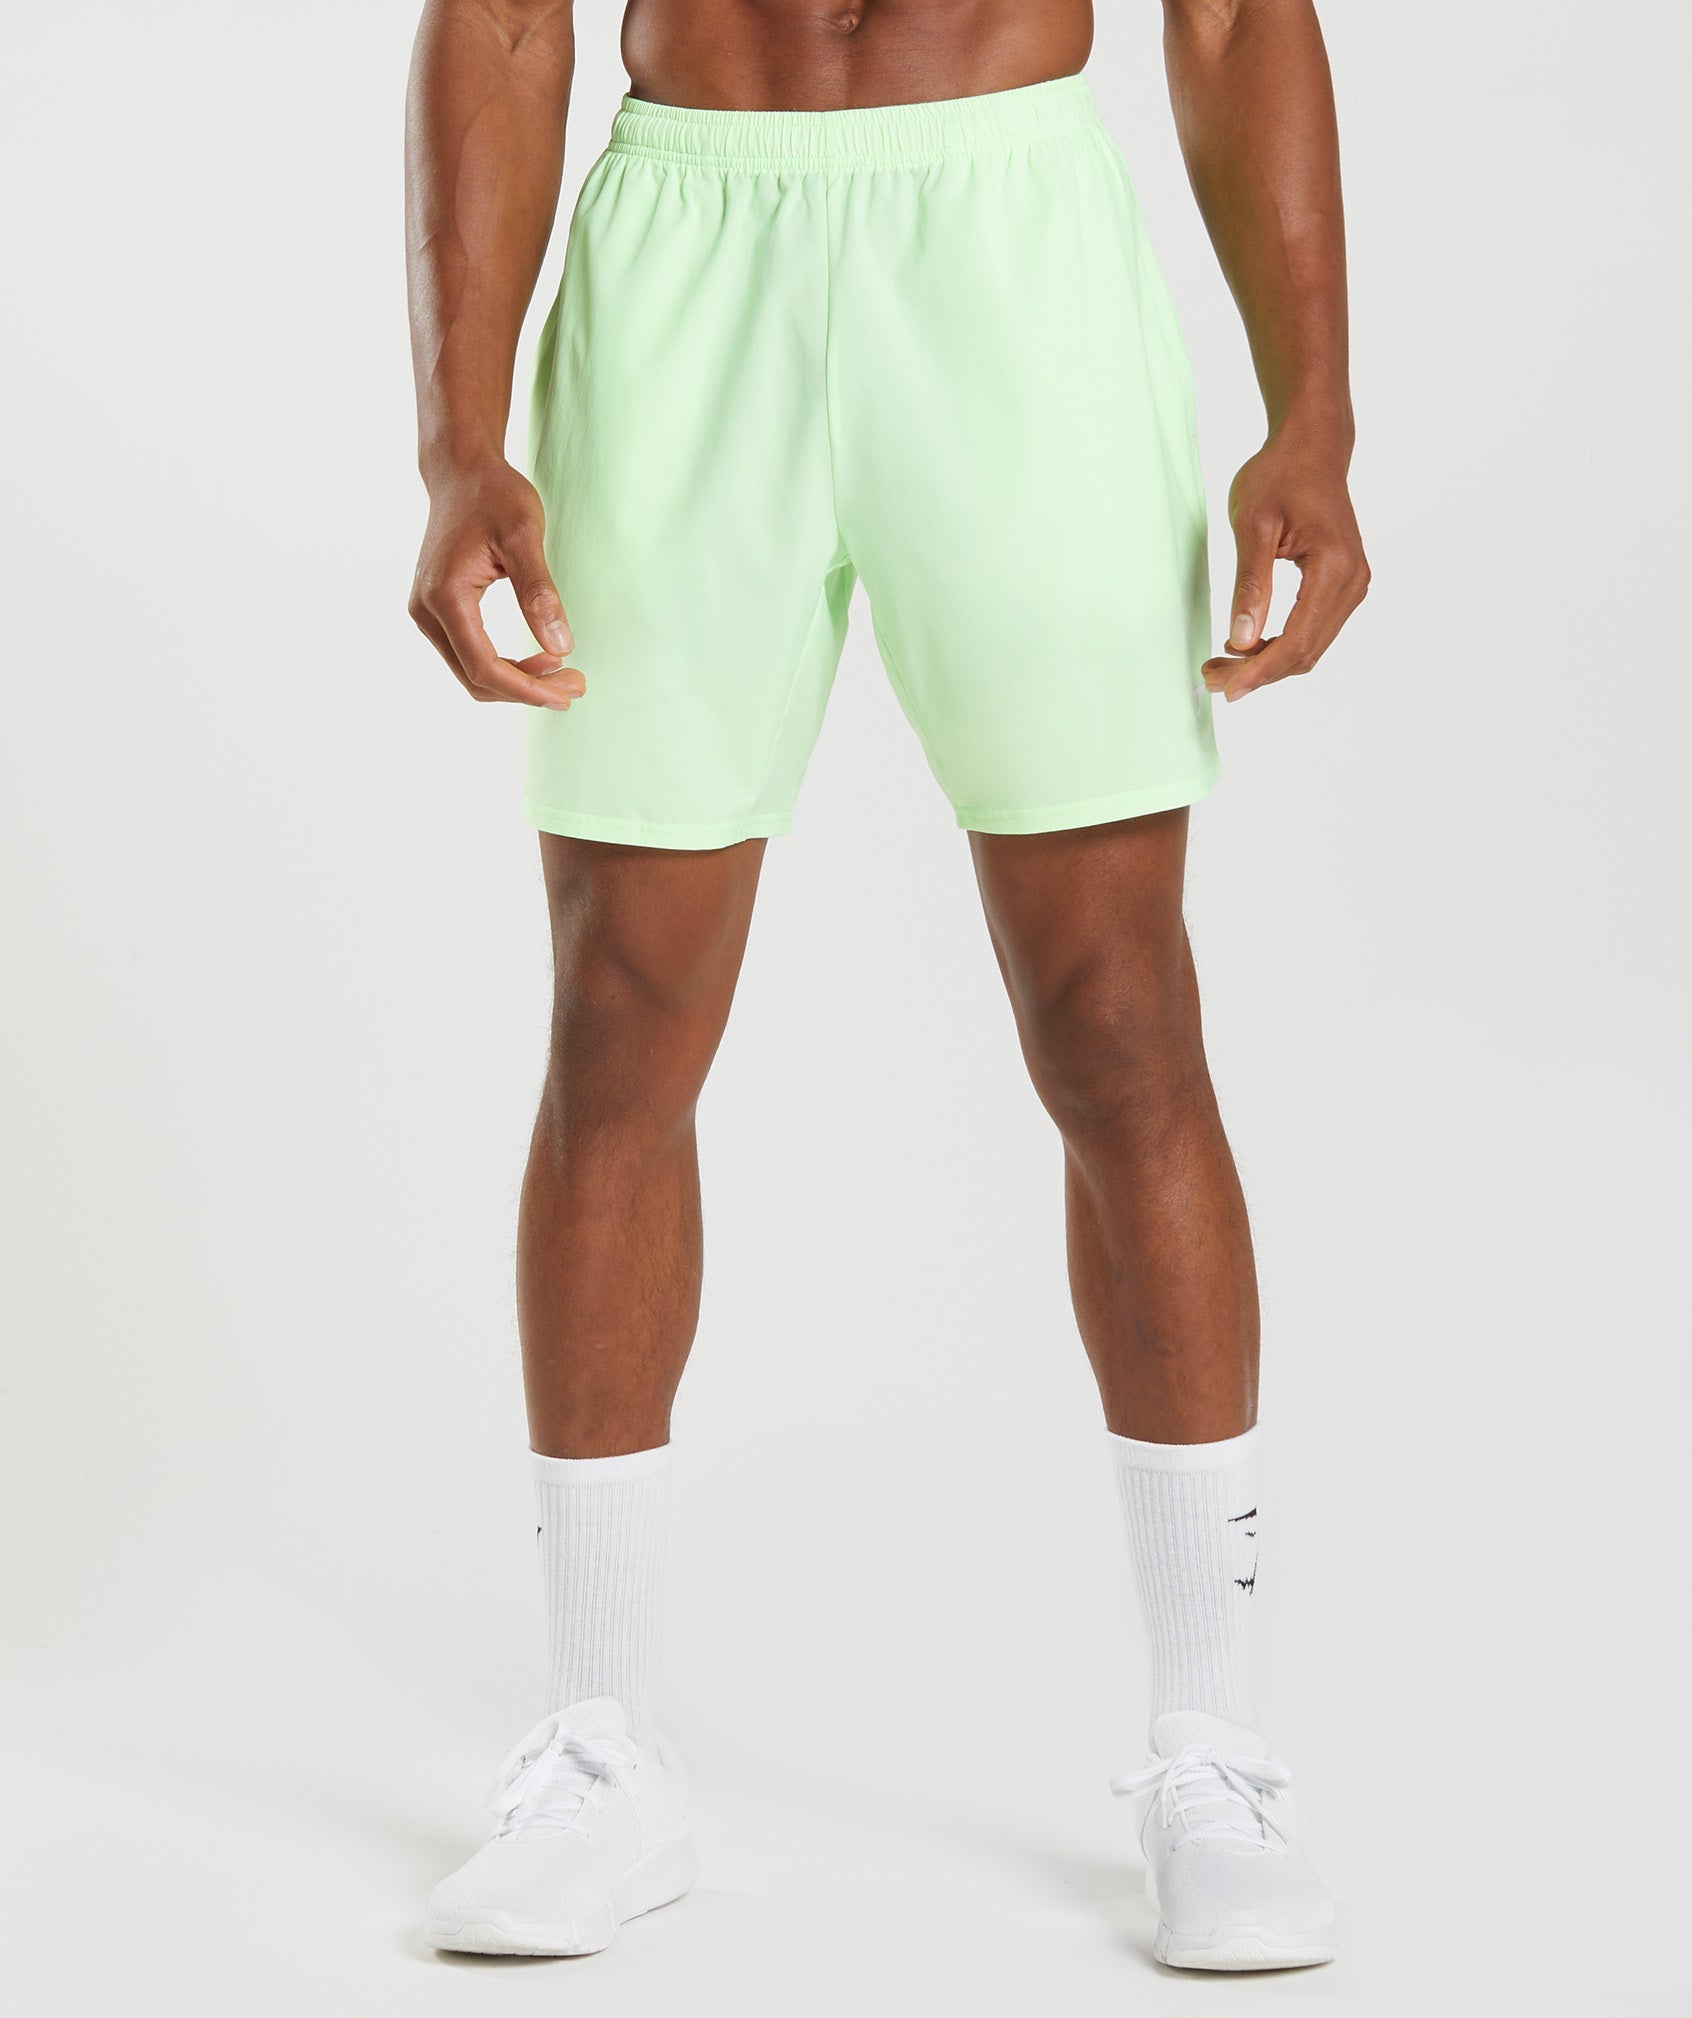 Arrival Shorts in Fluo Mint